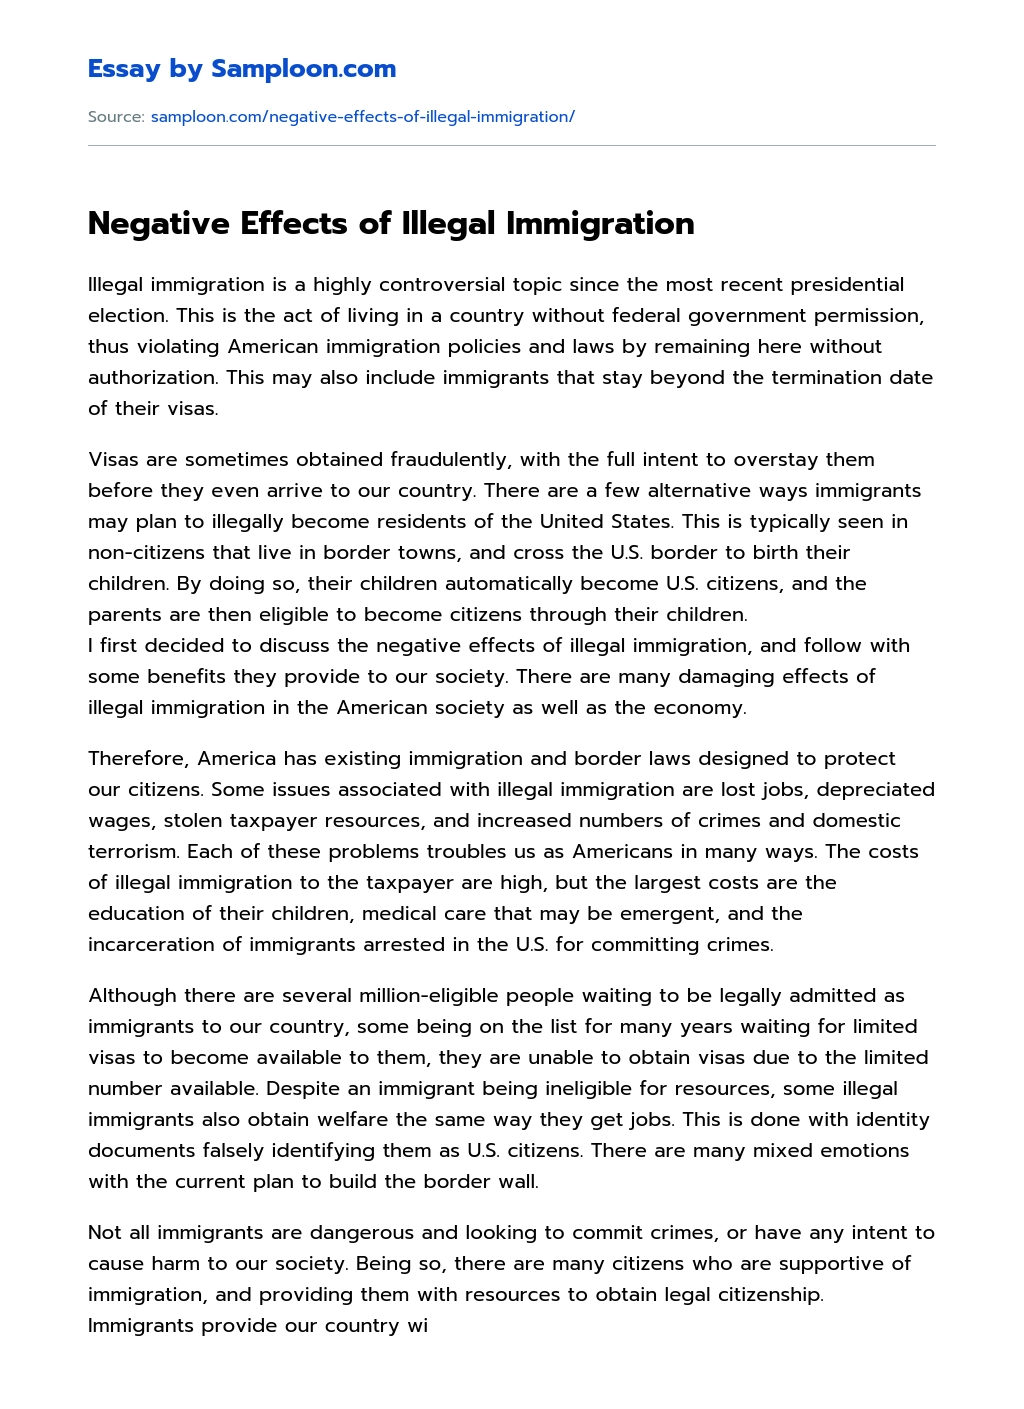 Negative Effects of Illegal Immigration essay